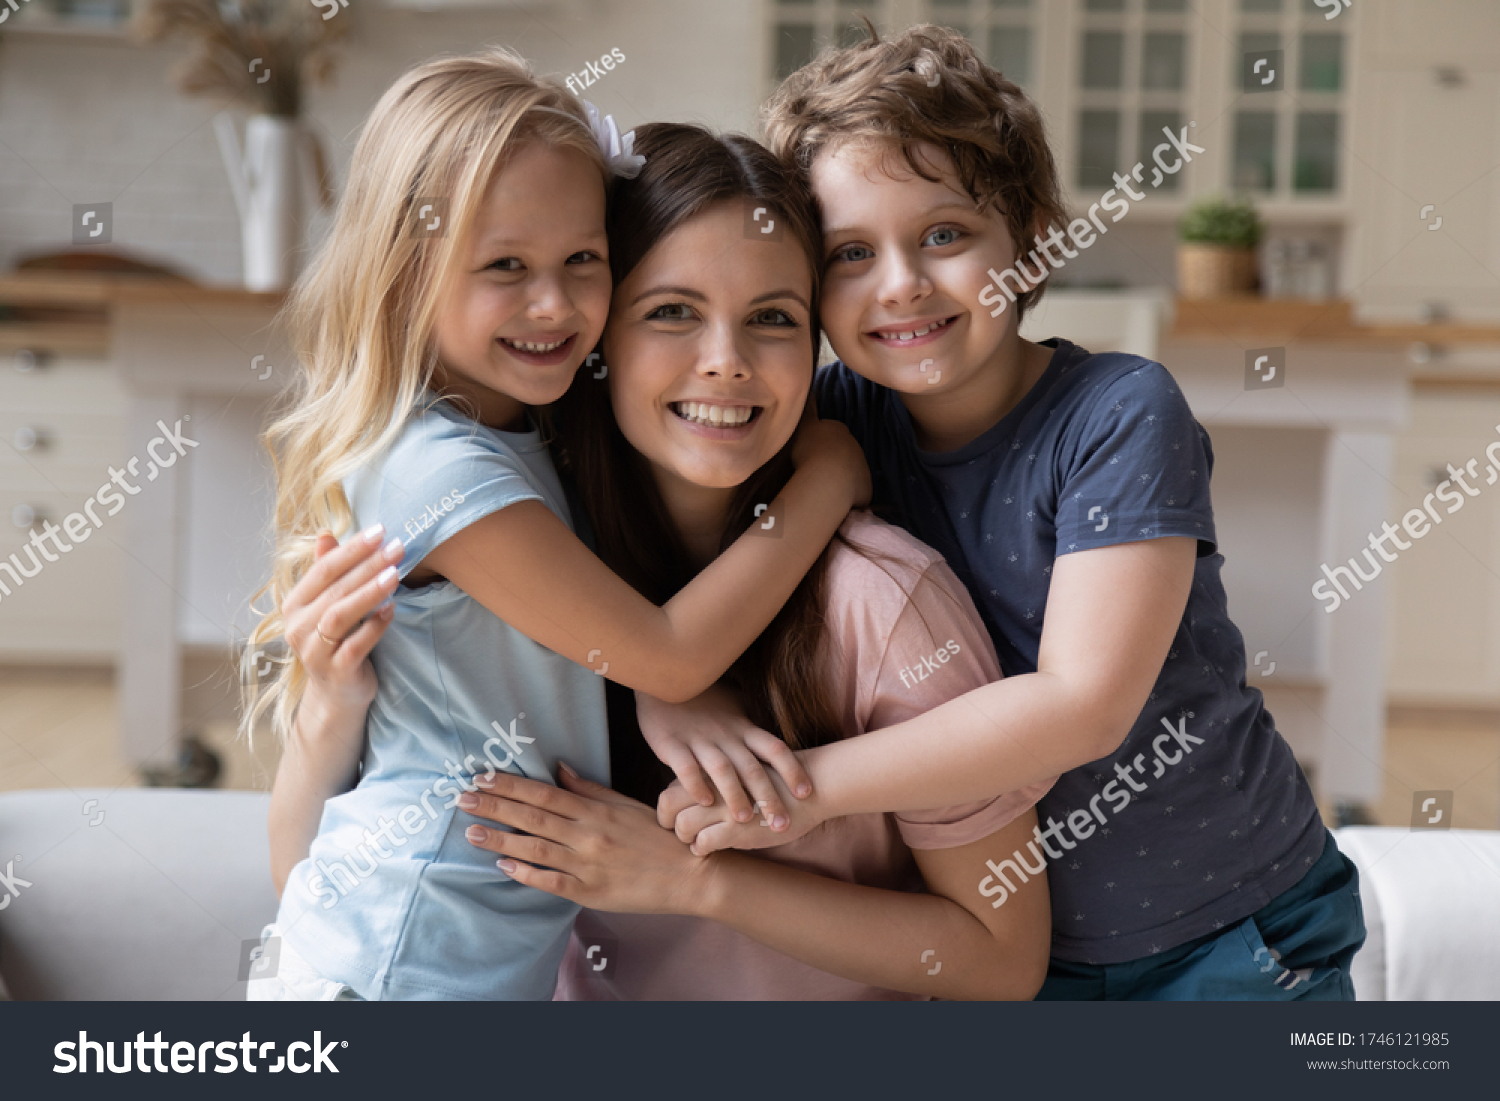 Portrait of happy young mother hug cuddle with smiling little children relax on weekend at home, smiling overjoyed small kids embrace mom or nanny show love and gratitude, family bonding concept #1746121985